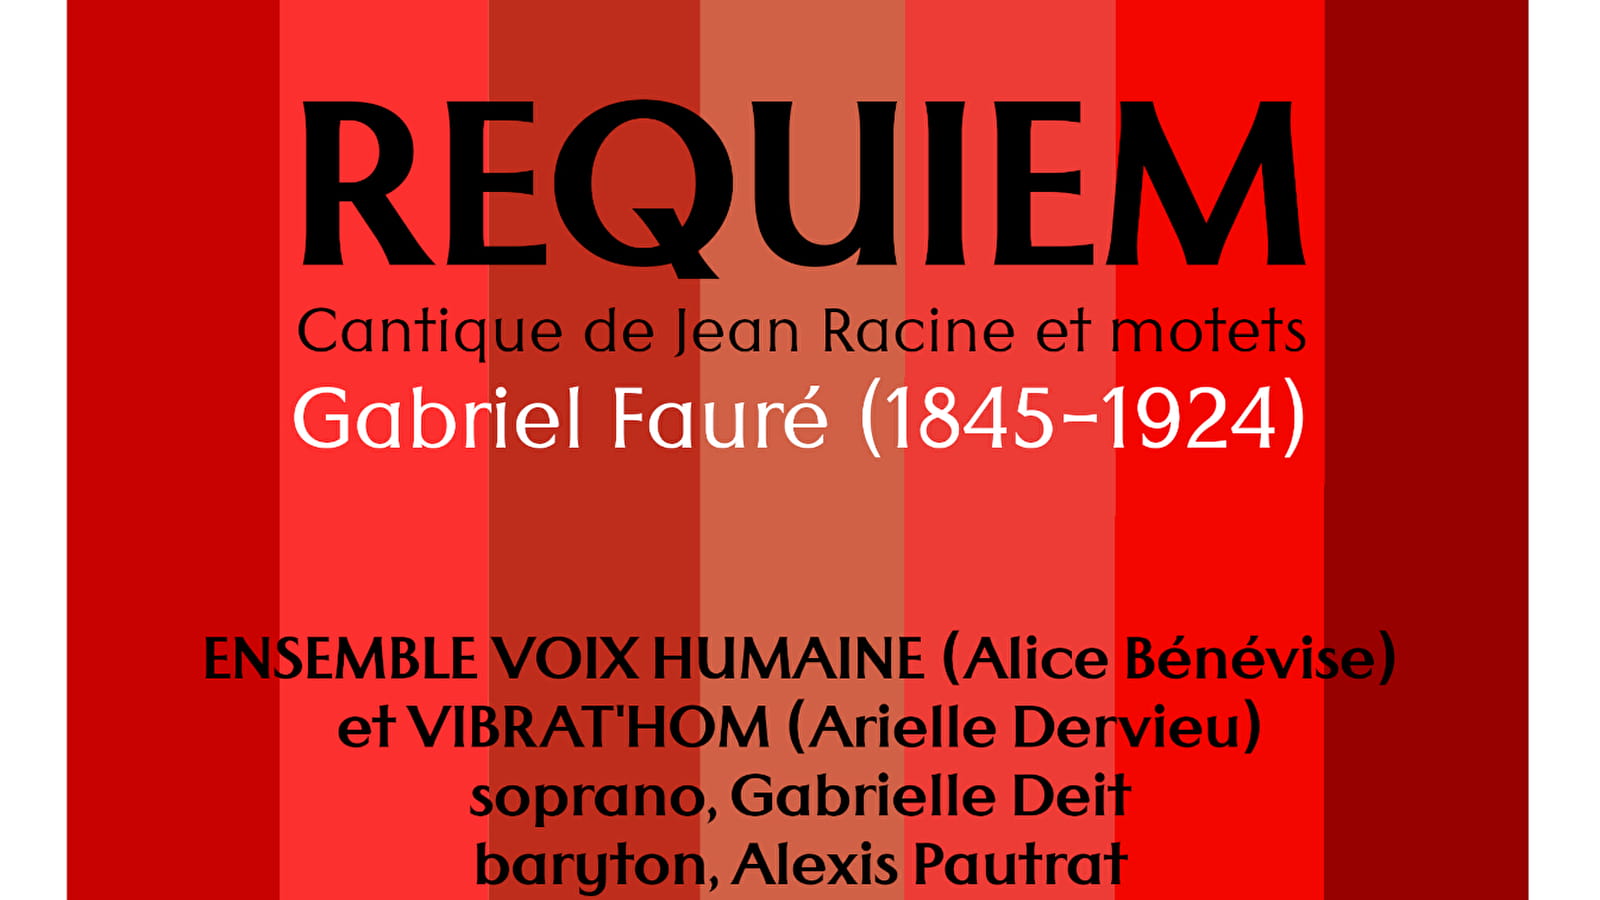 Requiem by Fauré - Cantique by Jean Racine and motets